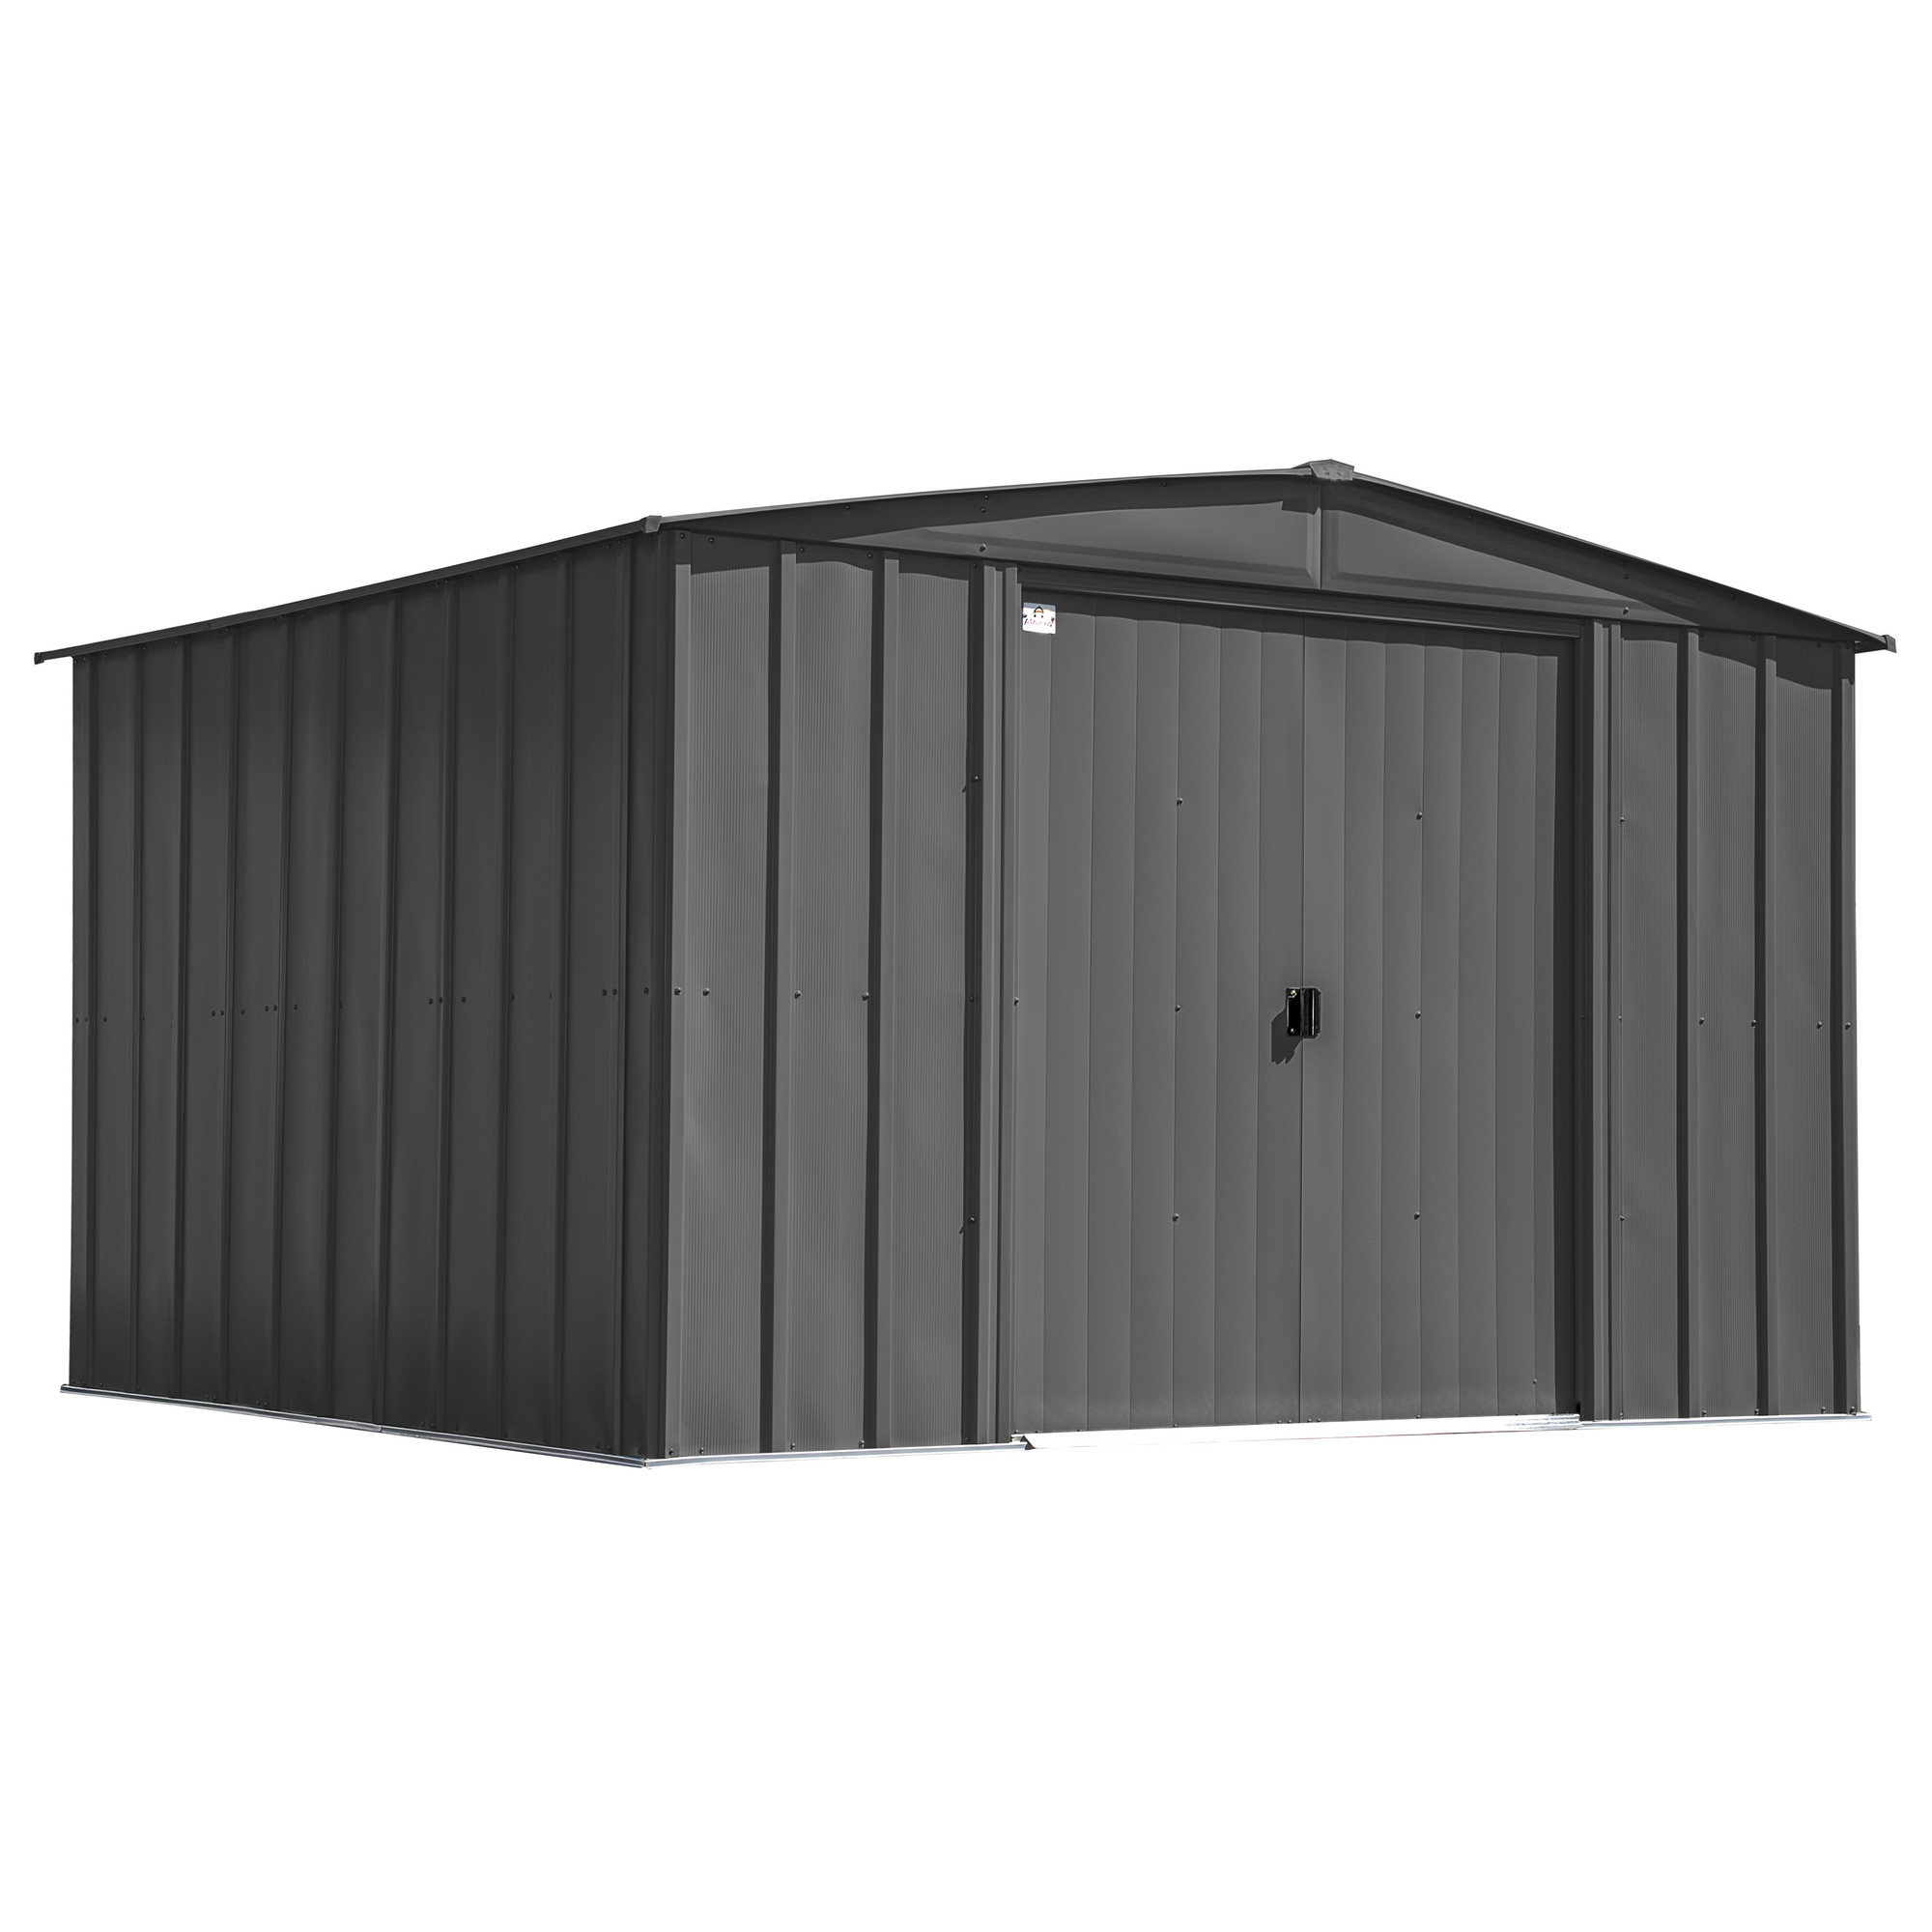 Arrow Storage Products, Classic Steel Shed 10x12 Charcoal CLG1012CC, Length 12 ft, Width 10 ft, Model CLG1012CC